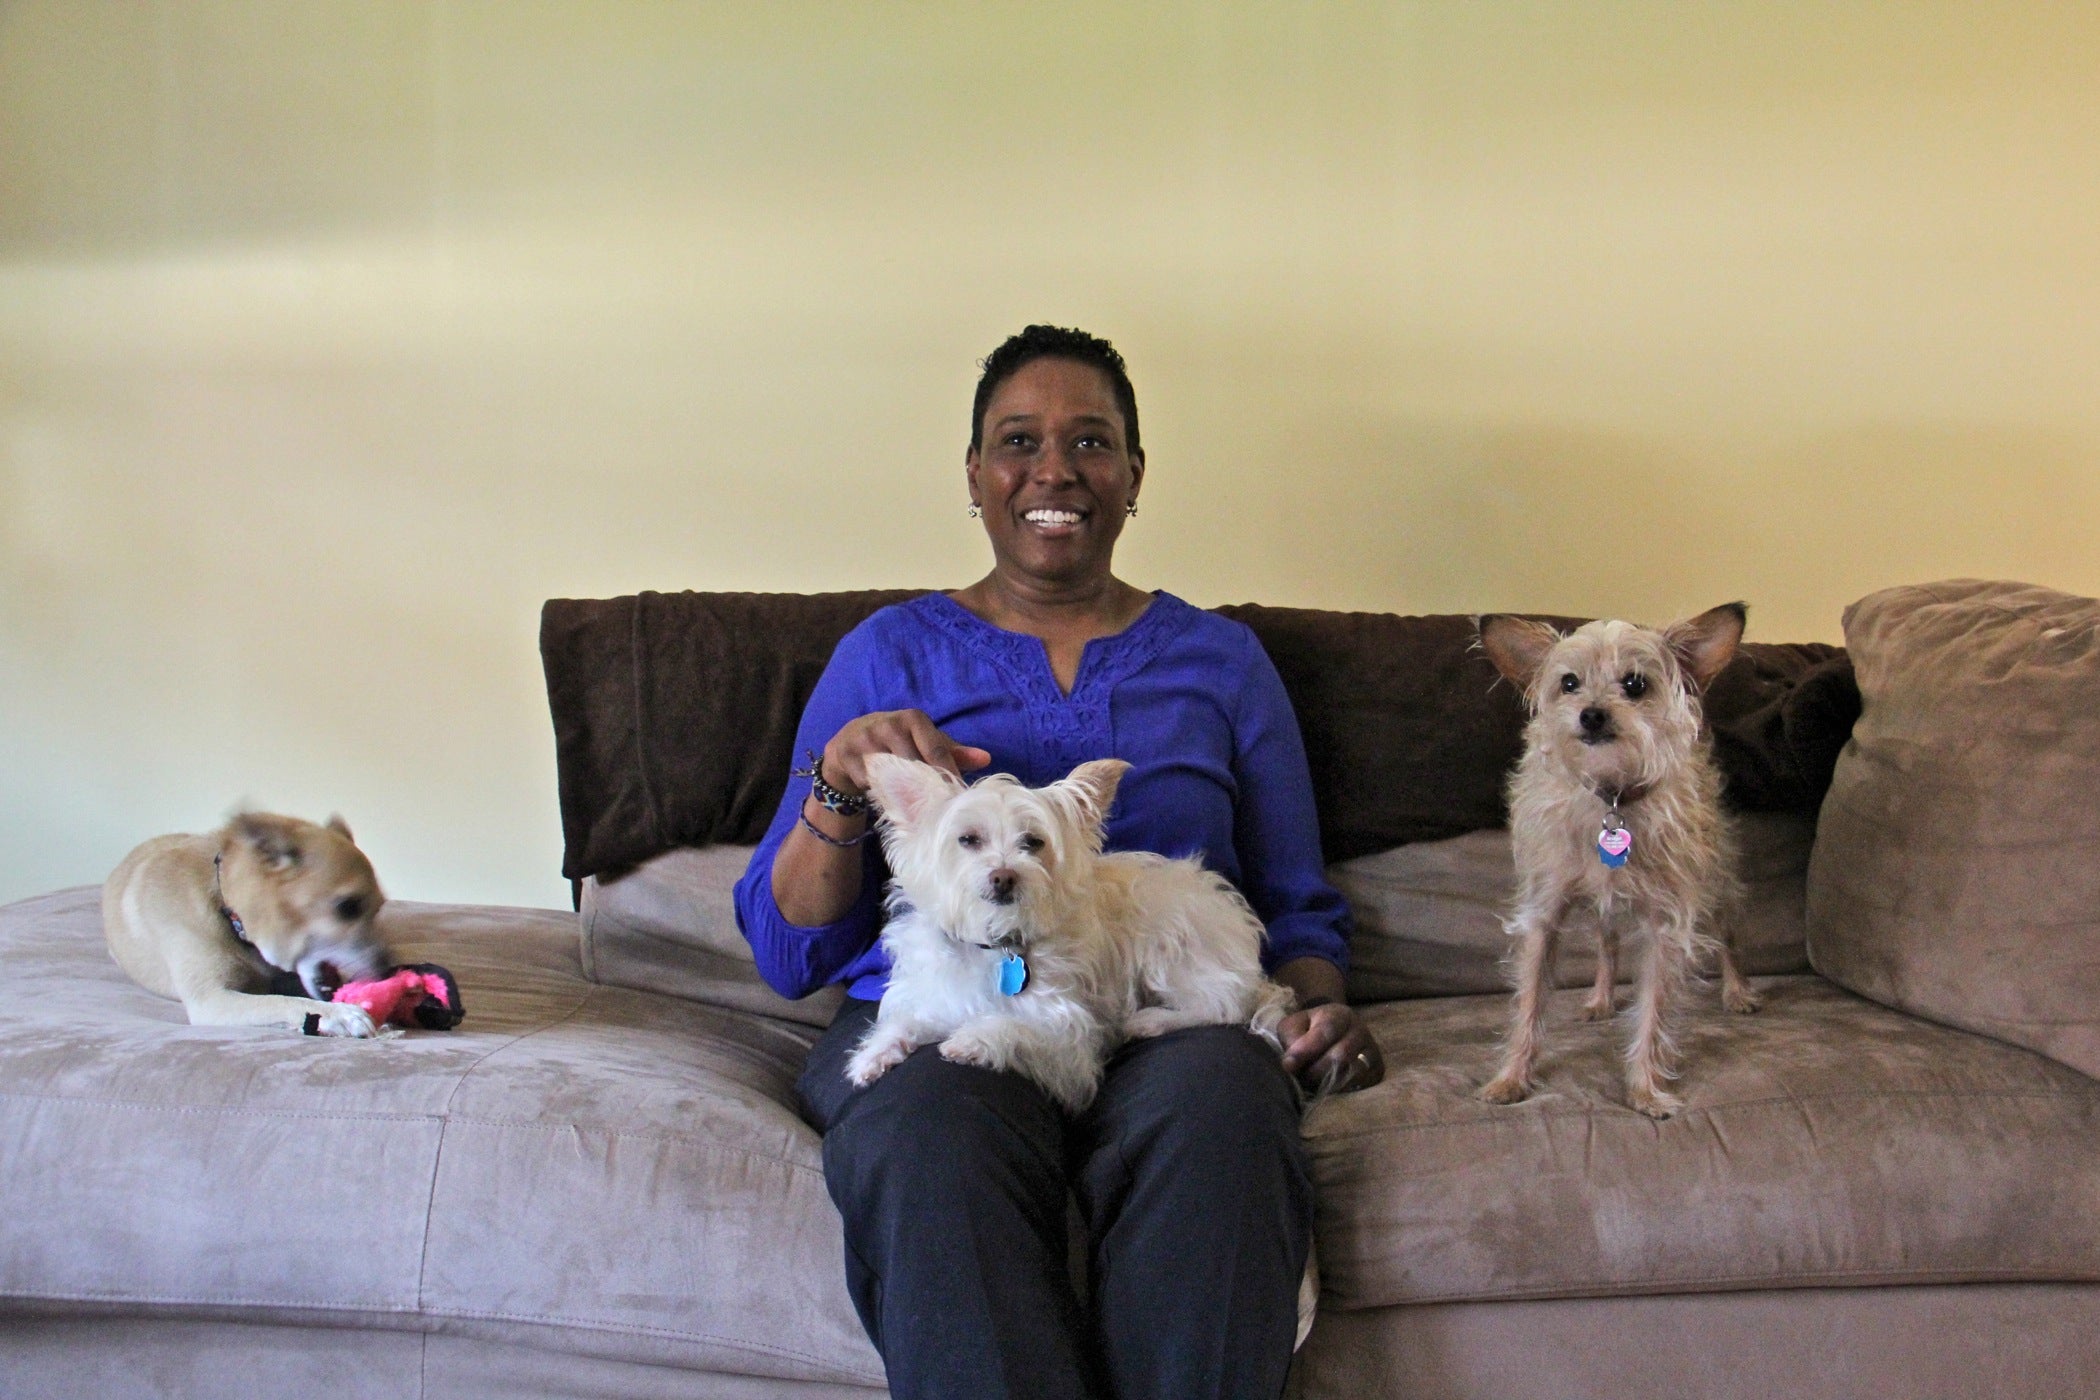 Rabbi Sandra Lawson at home with three rescue dogs she and her wife adopted.